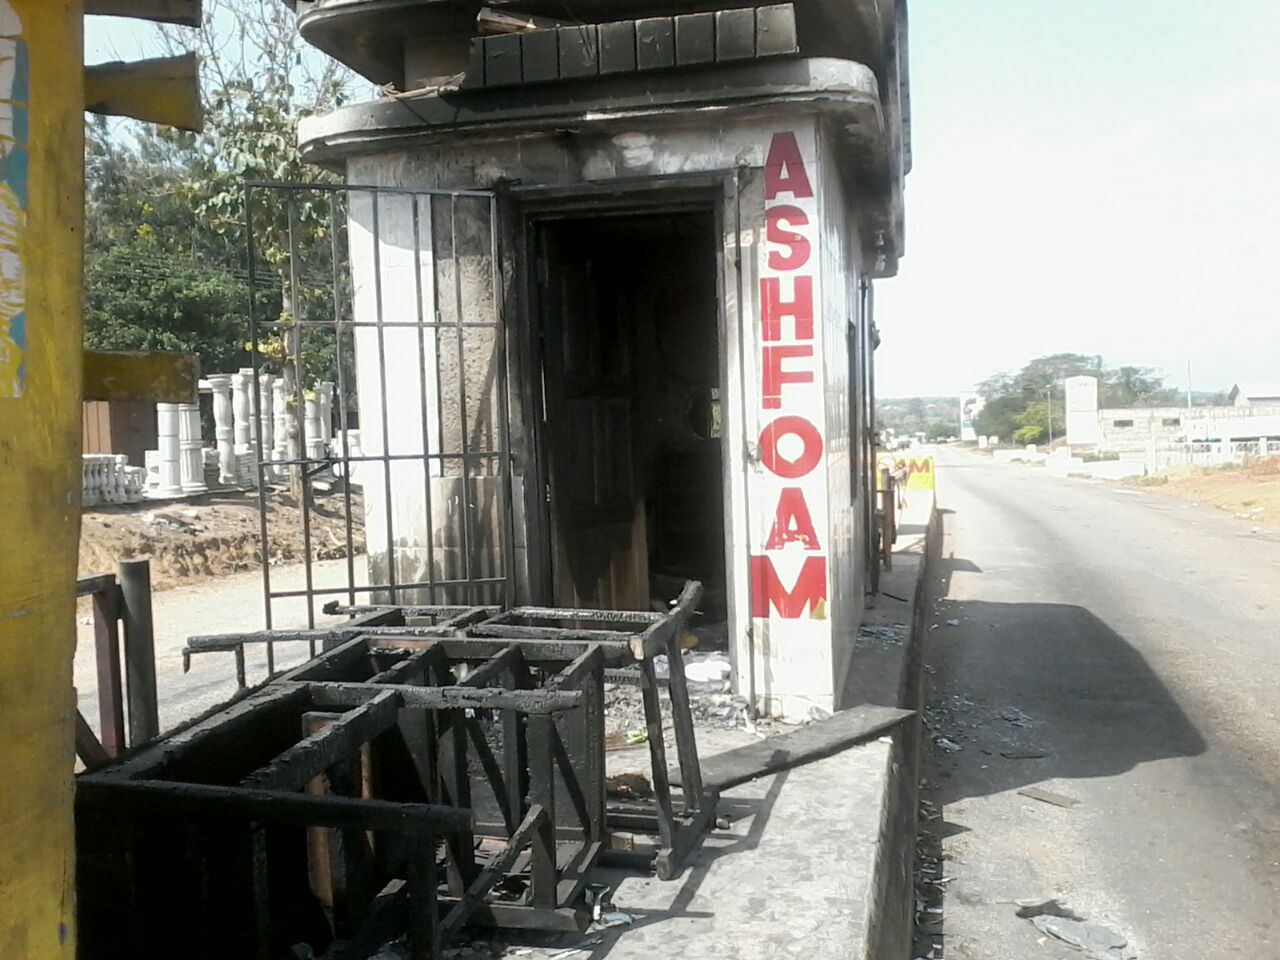 #NPPvictory: Fiapre toll booth attendants chased out, monies and booth set ablaze